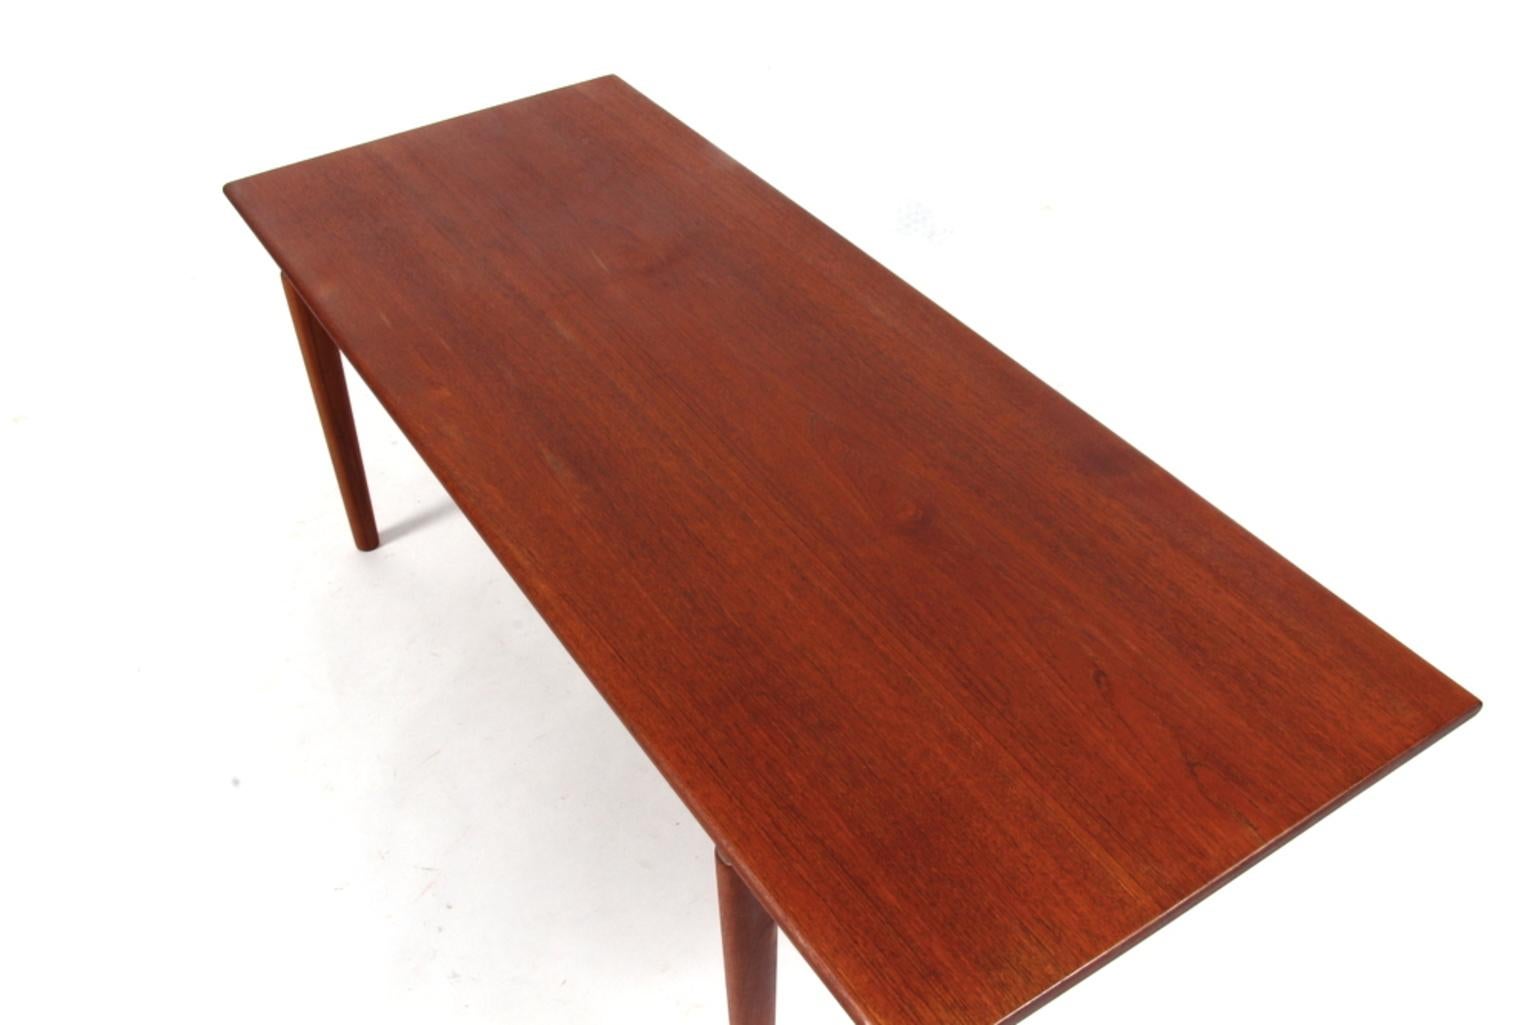 Hans J. Wegner sofa table made in solid soap treated oak.

Model AT15, made by Andreas Tuck.